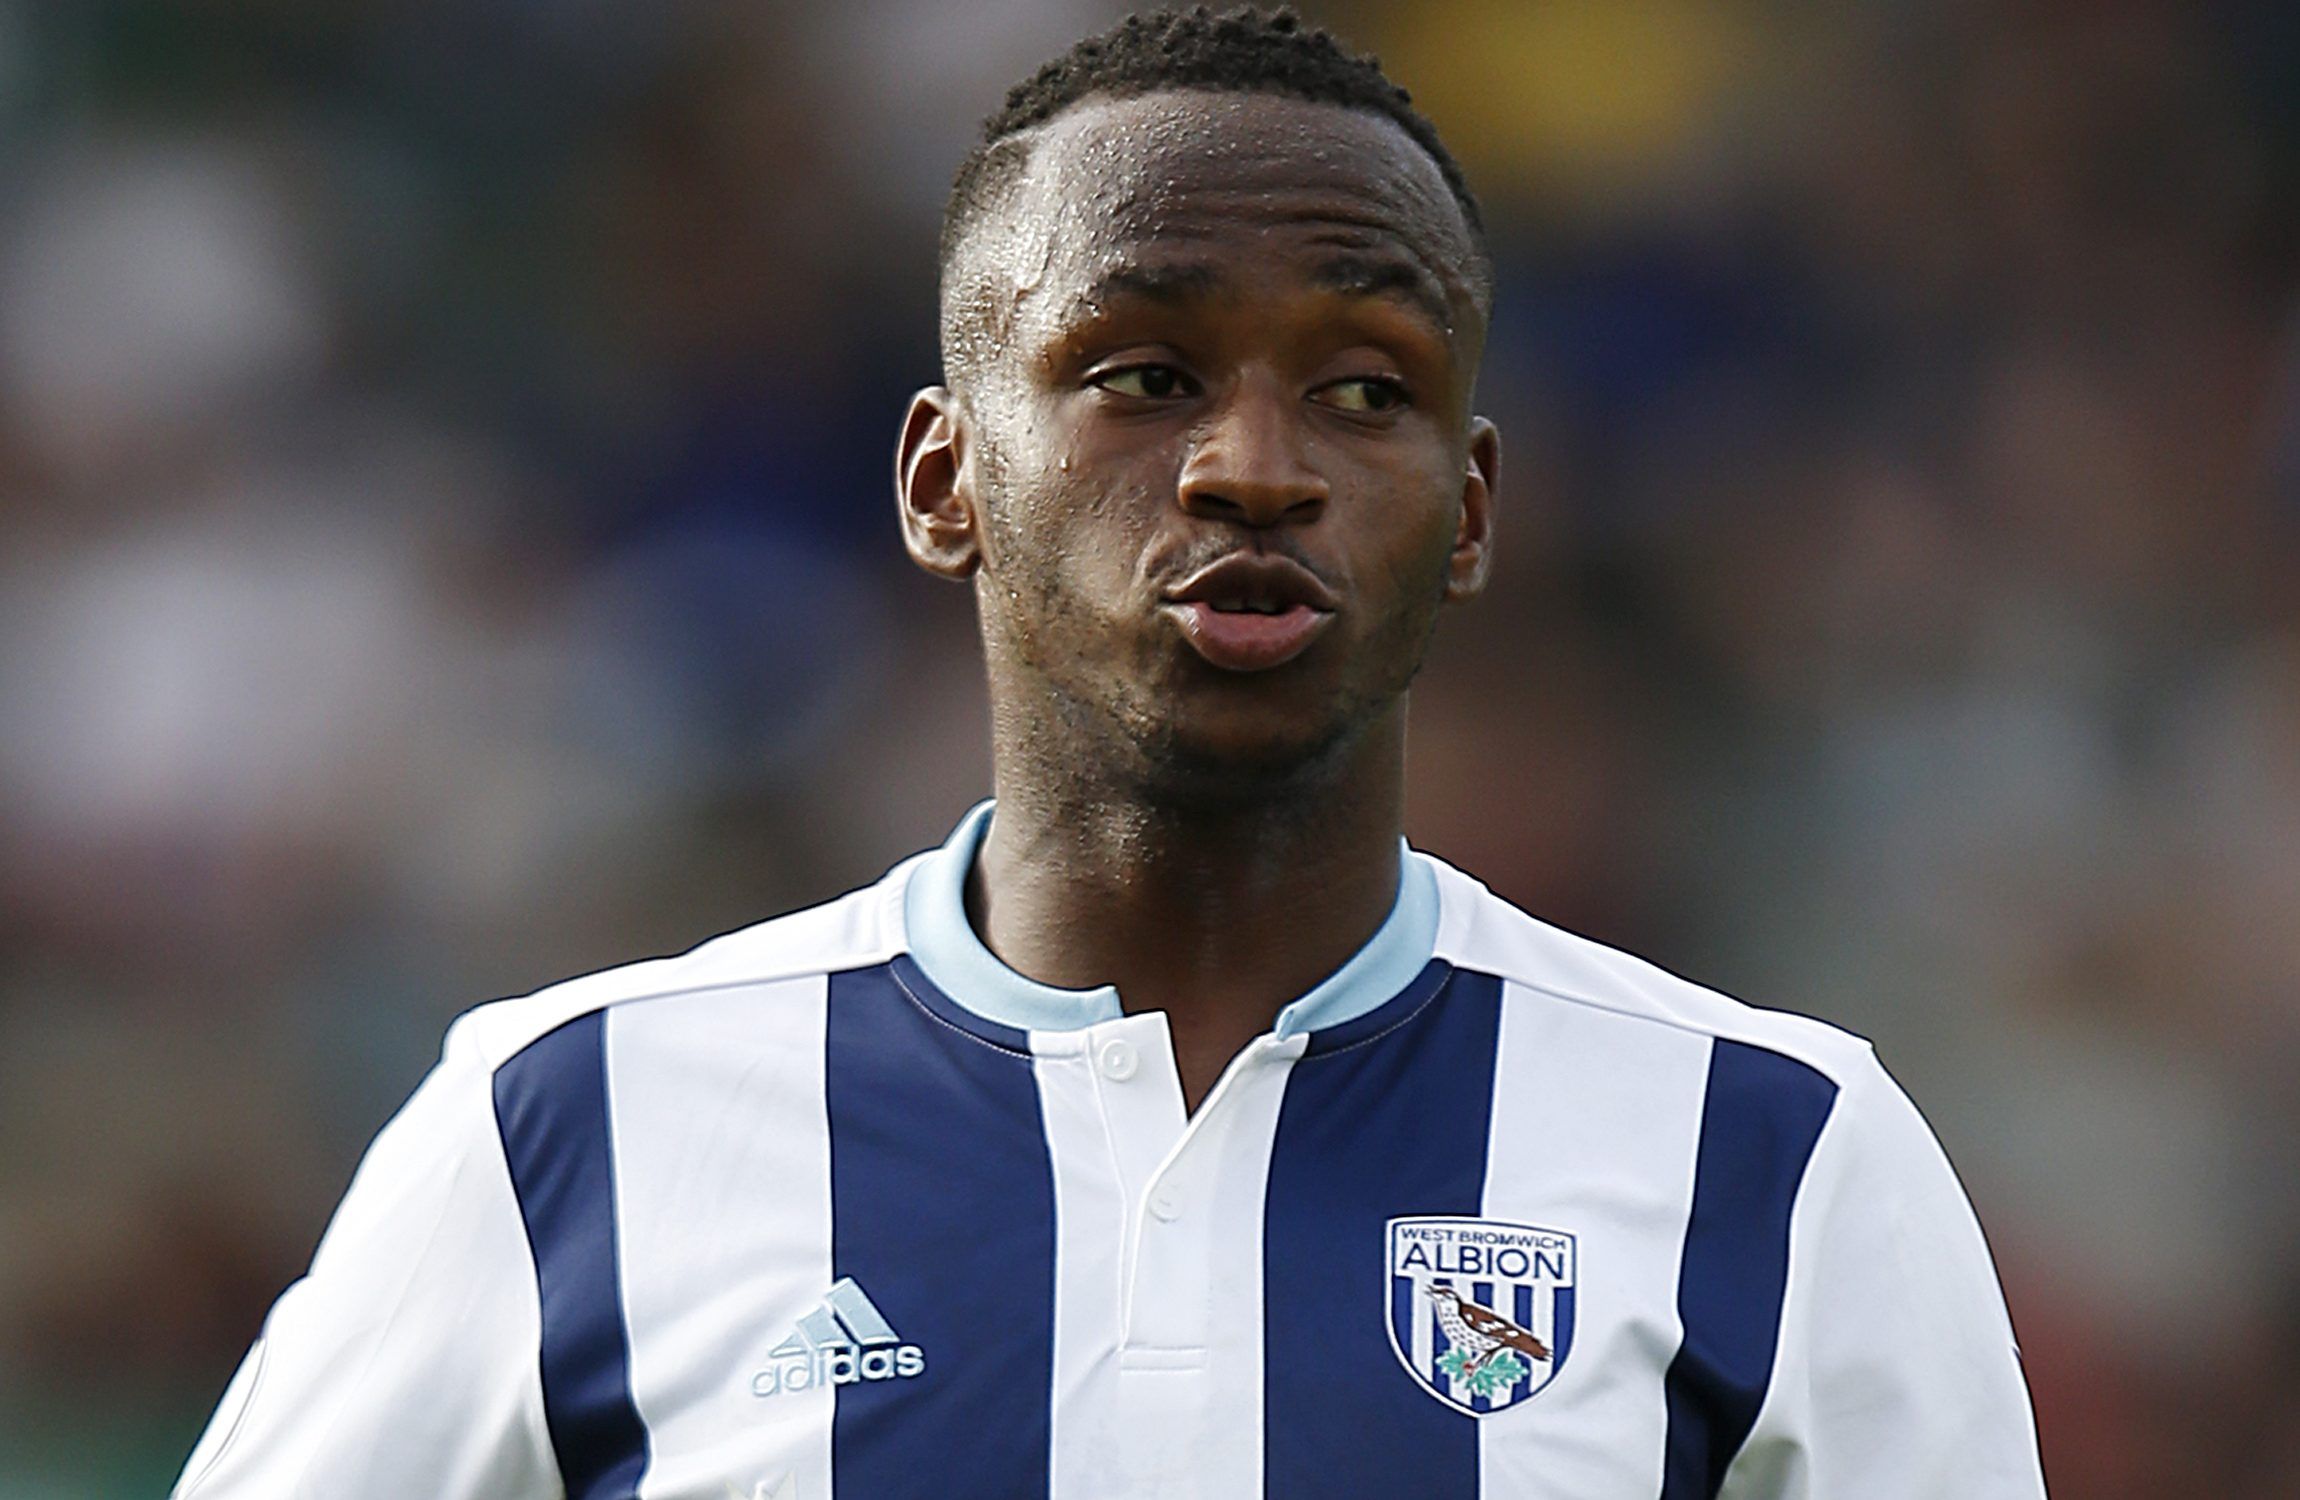 saido-berahino-west-bromwich-albion-championship-league-one-sheffield-wednesdayBritain Football Soccer - Plymouth Argyle v West Bromwich Albion - Pre Season Friendly - Home Park - 30/7/16
West Brom's Saido Berahino
Action Images via Reuters / Paul Childs
Livepic